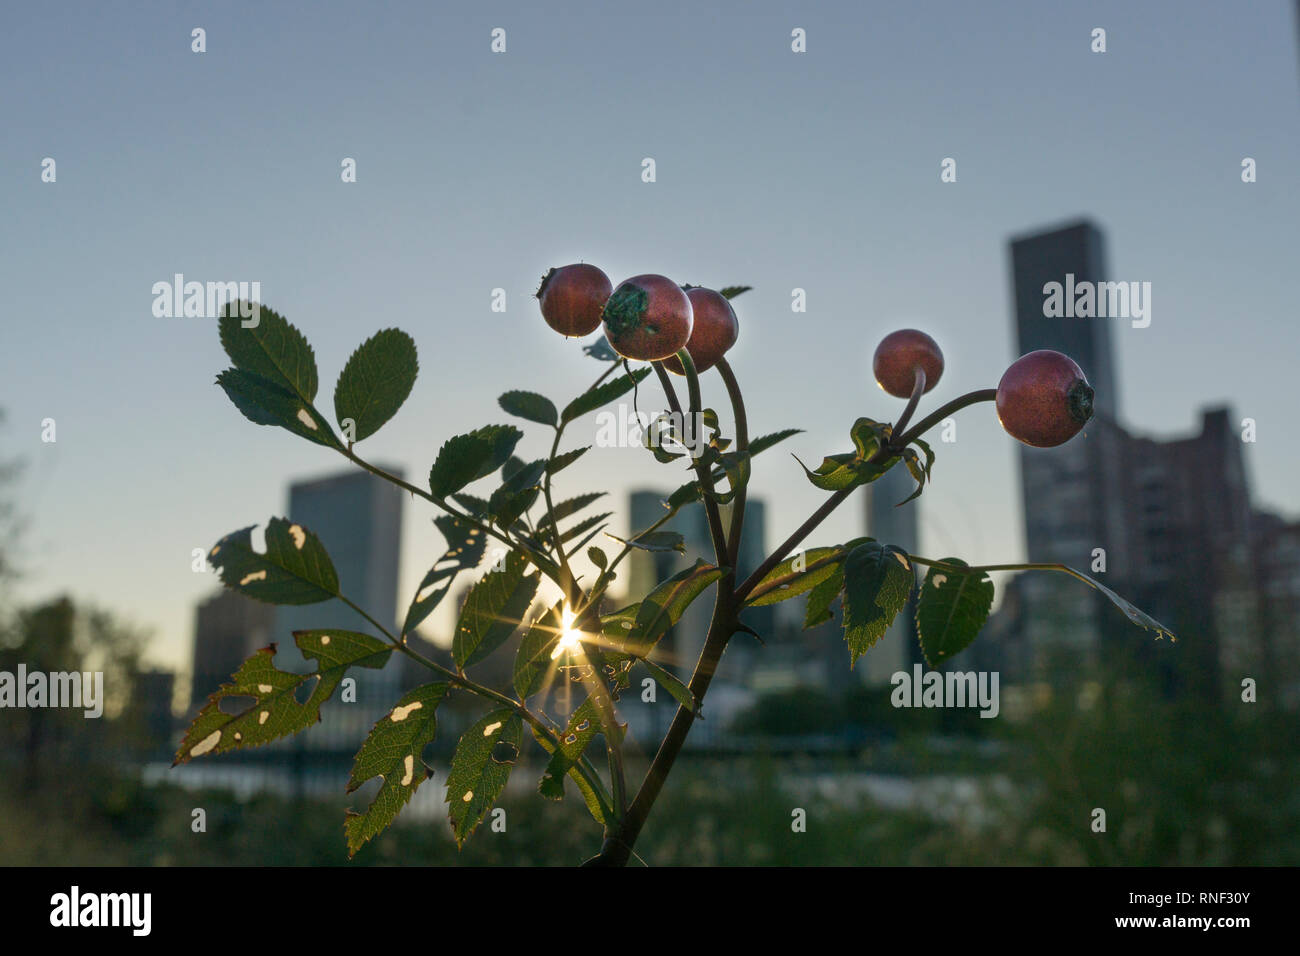 A man's hand holds up Rose Hips against a midtown Manhattan cityscape, New York City, New York, USA Stock Photo